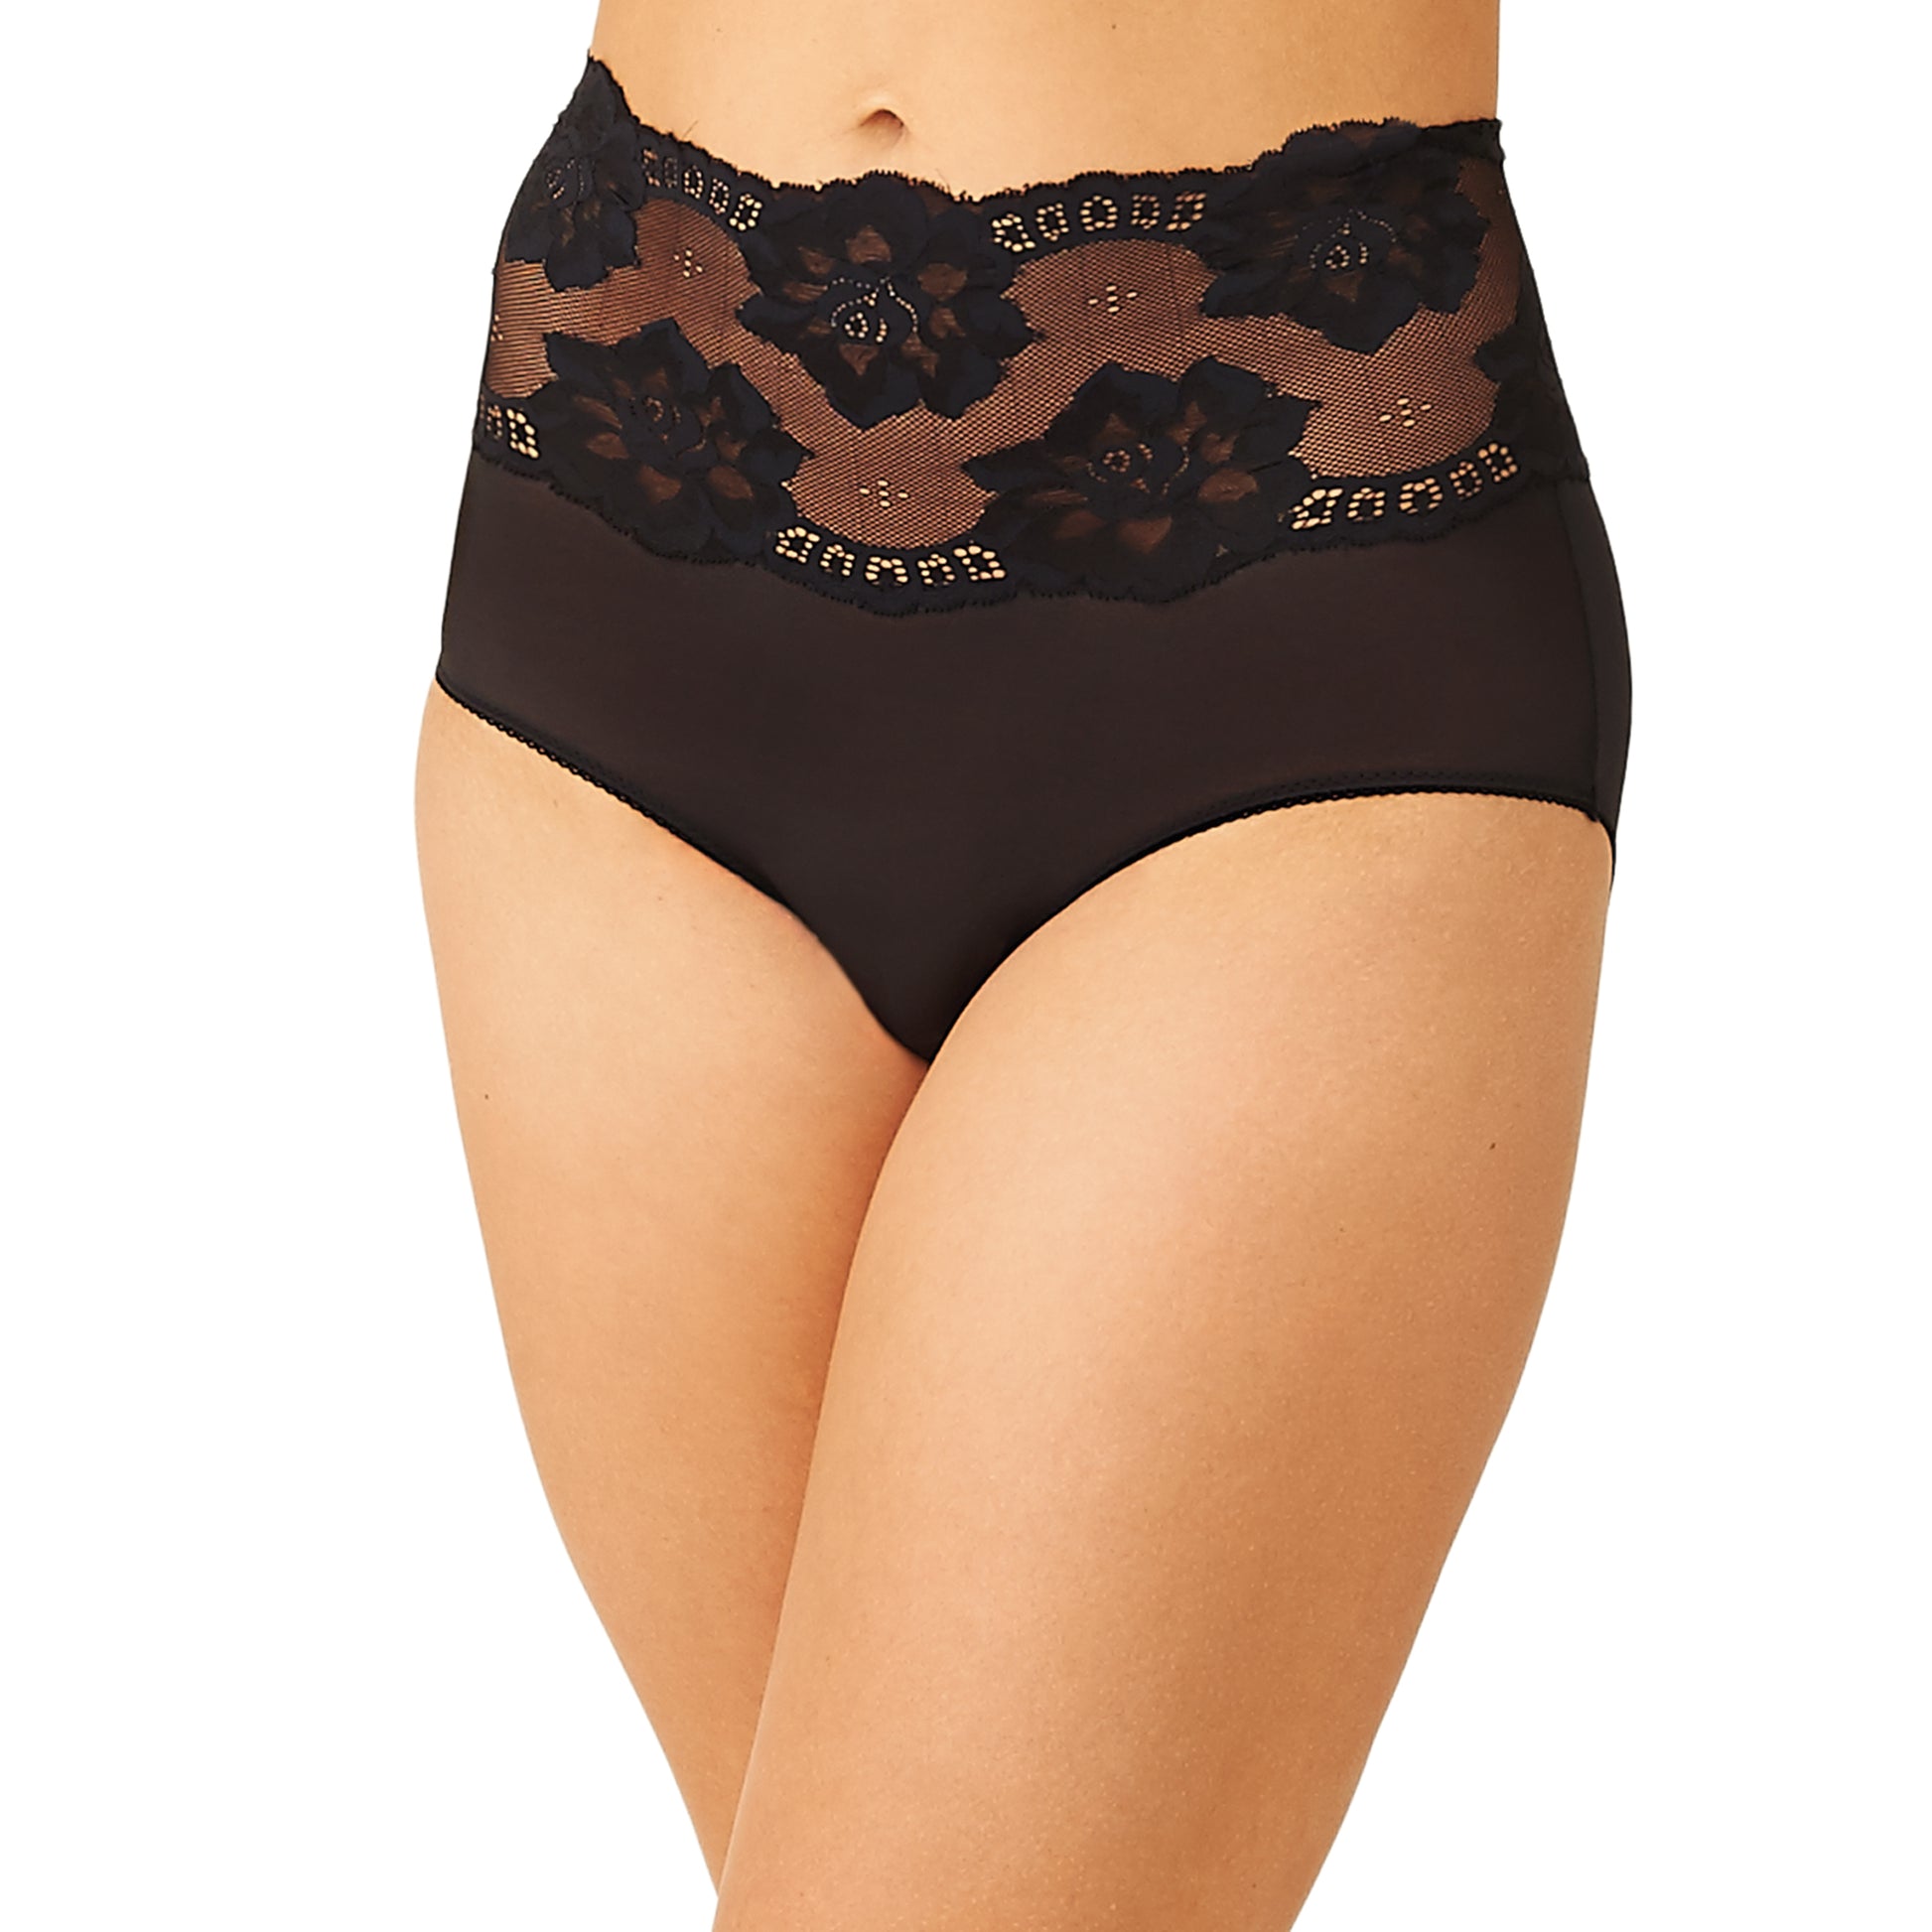 Light and Lacy Full Brief - 870363 Bras & Lingerie - Underwear - Full Brief Wacoal   